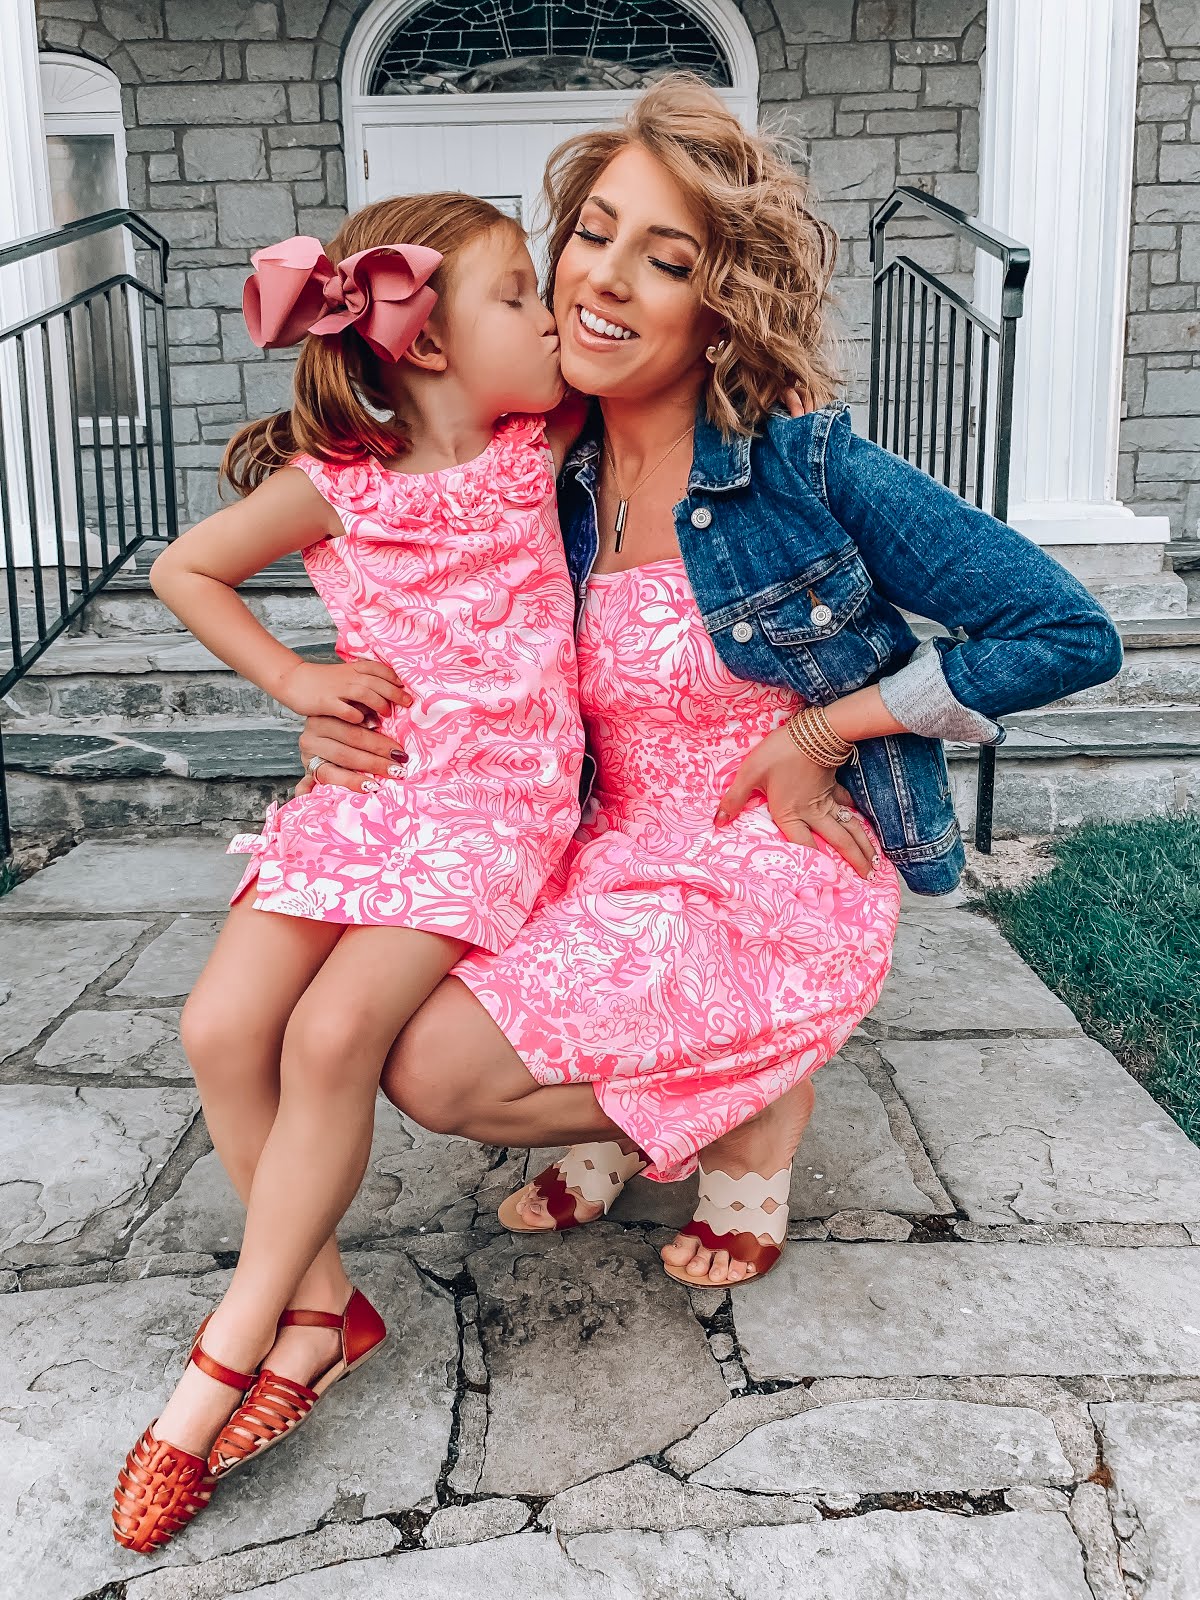 Lilly Pulitzer After Party Sale Summer 2019: Tips & Tricks for Shopping the Sale + Sizing Guide on Pieces Included  - Something Delightful Blog